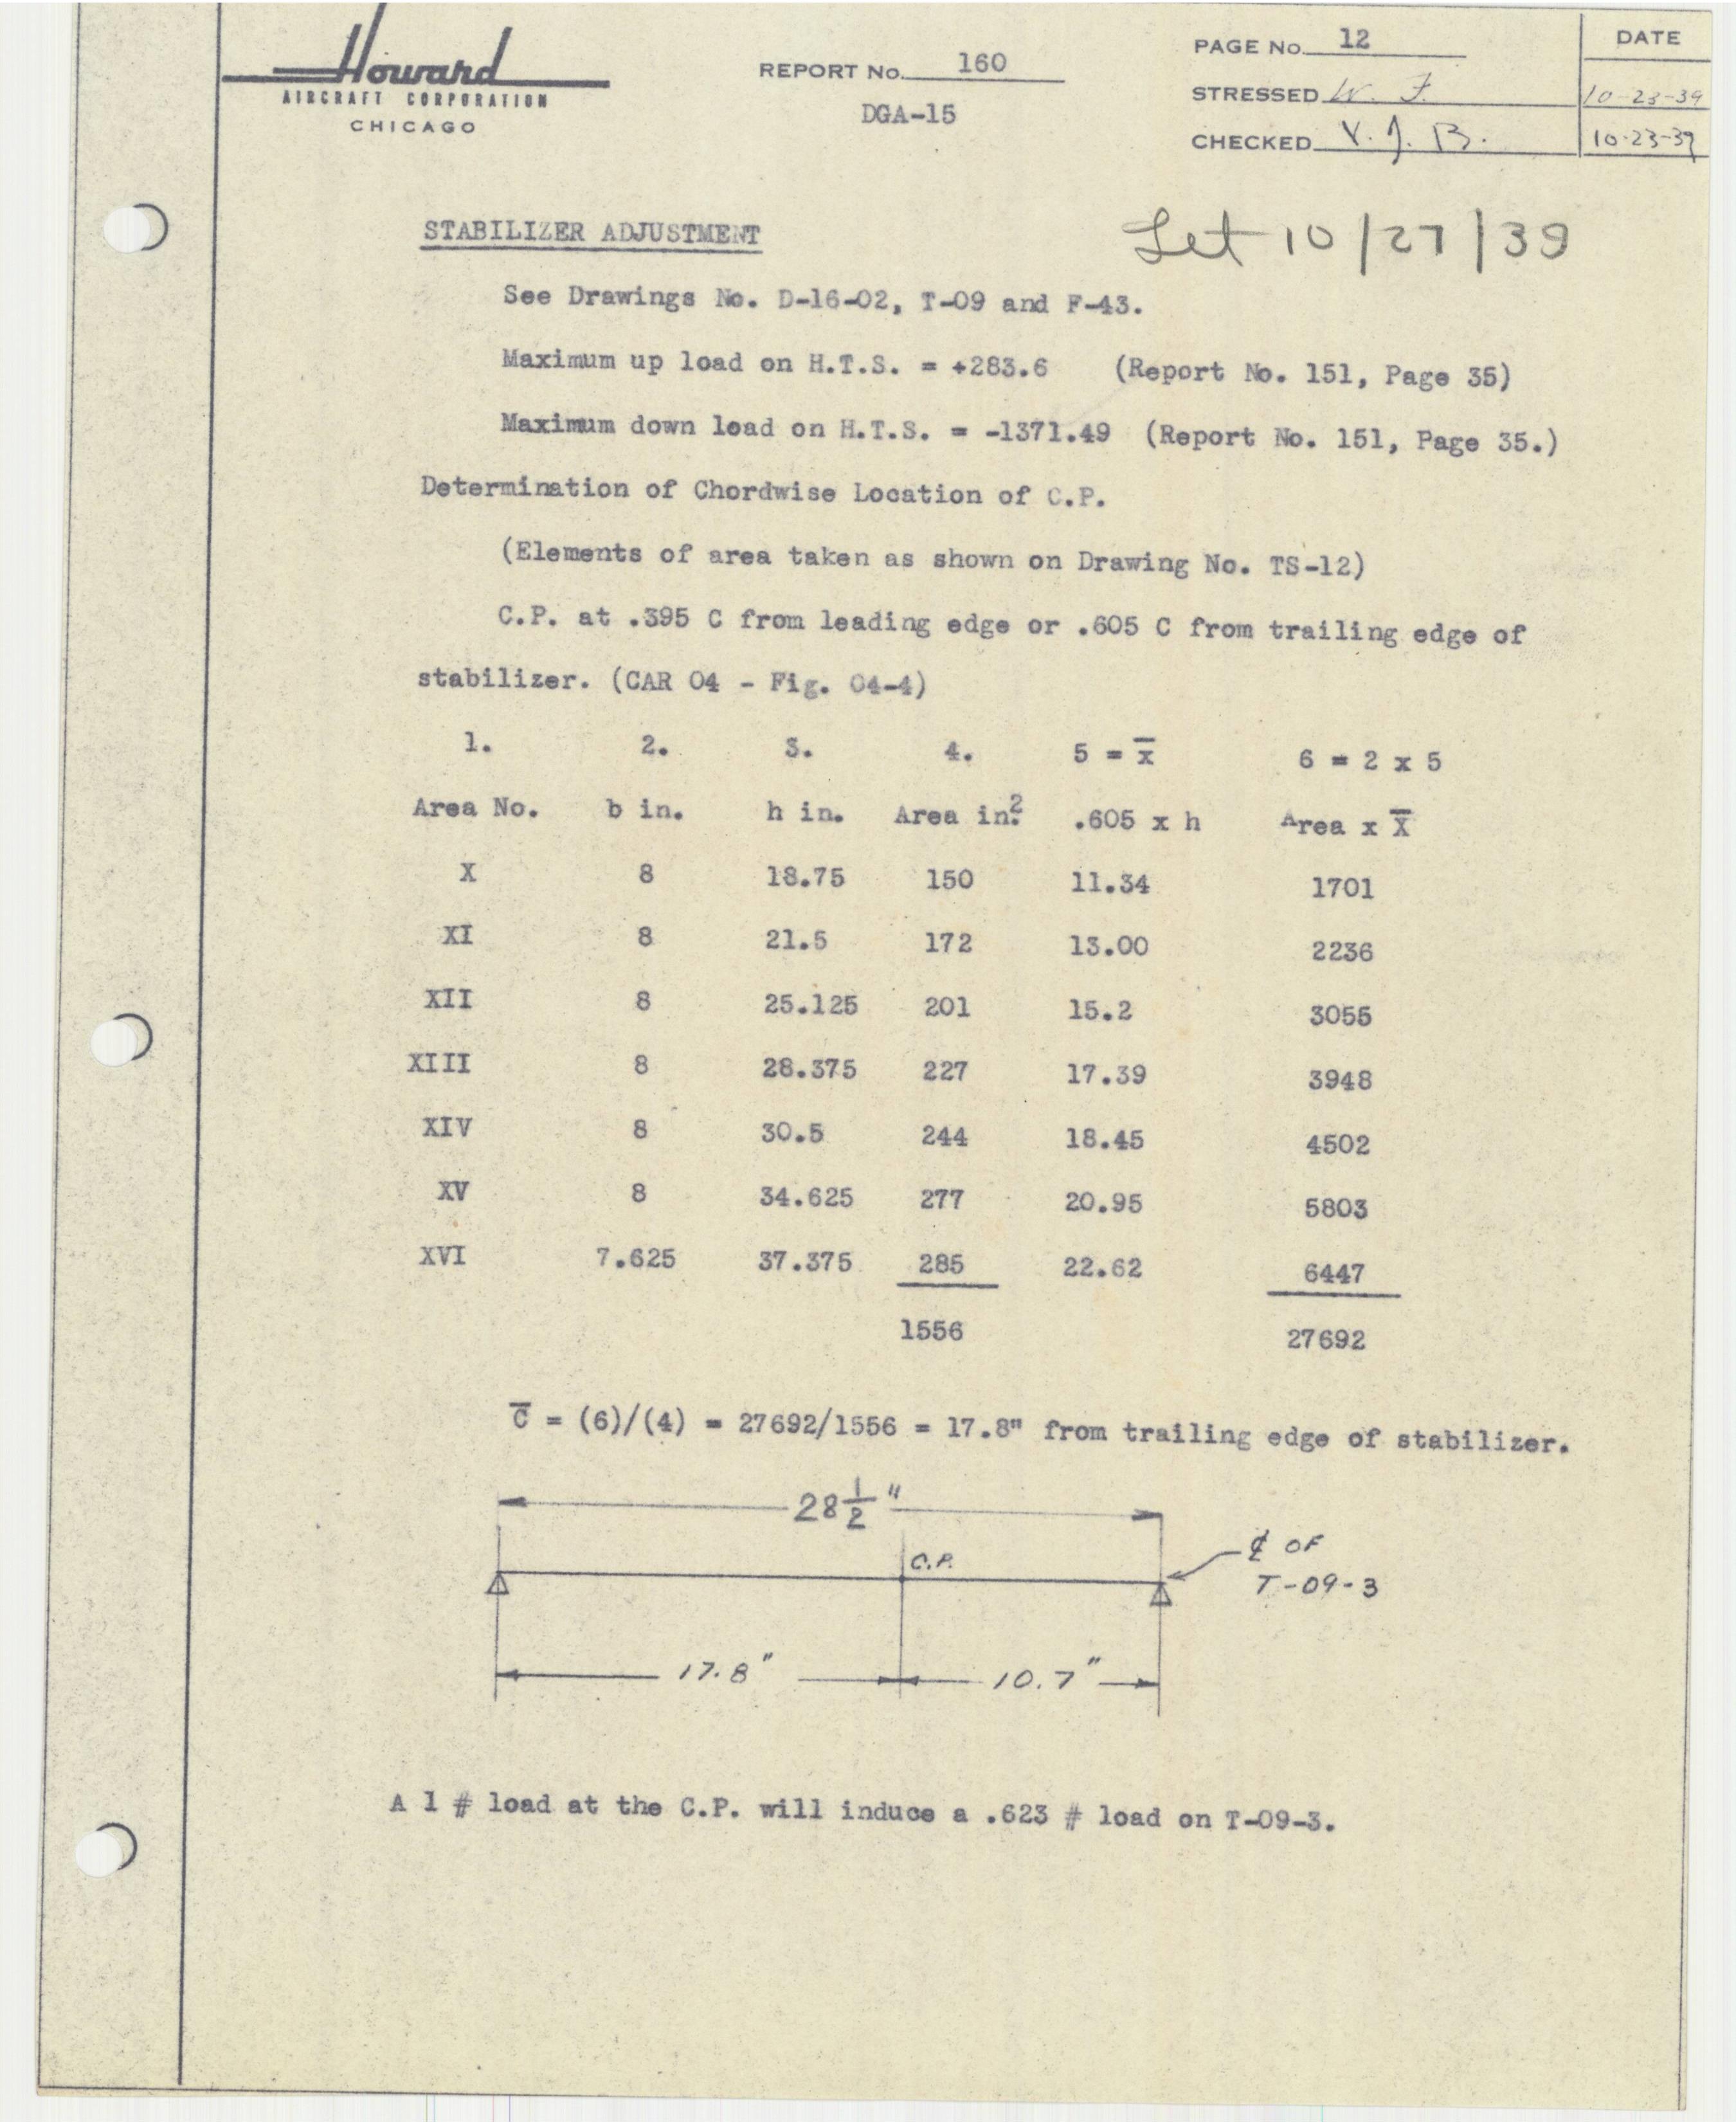 Sample page 37 from AirCorps Library document: Report 160, Control System Analysis, DGA-15